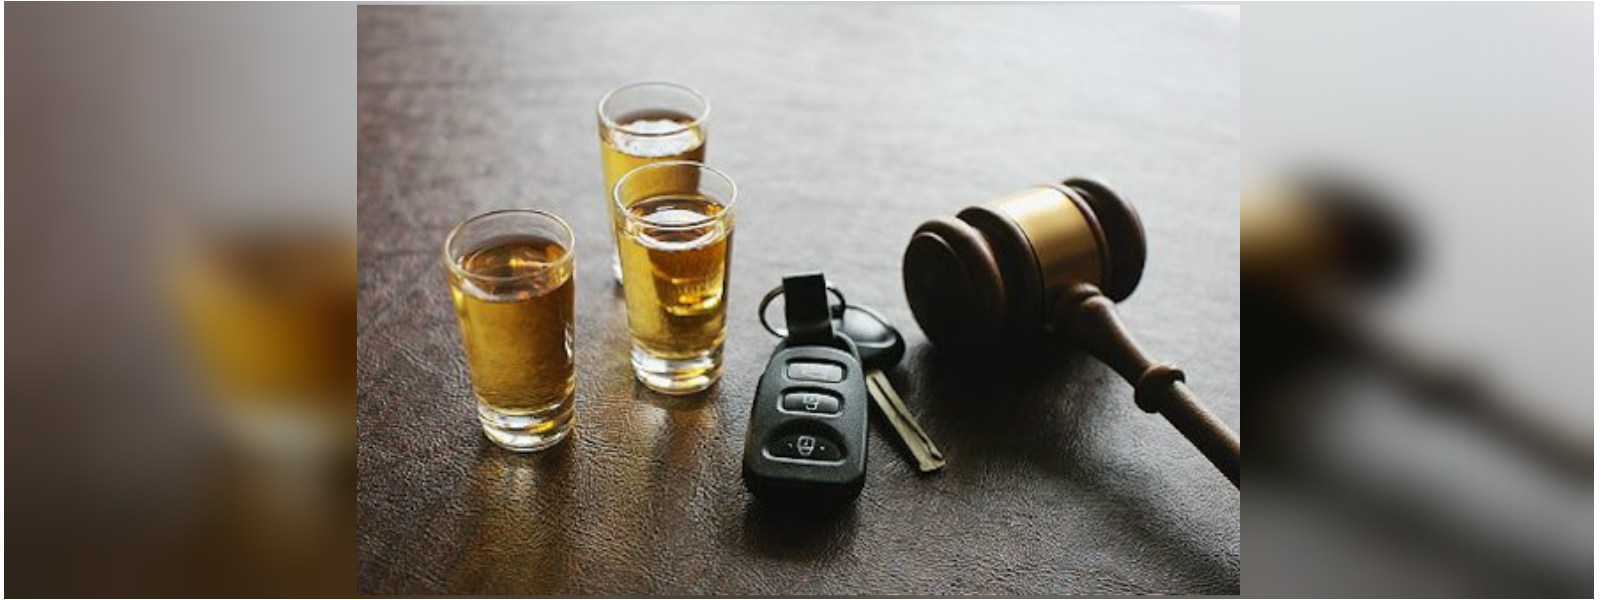 7666 DUI arrests in 33 days